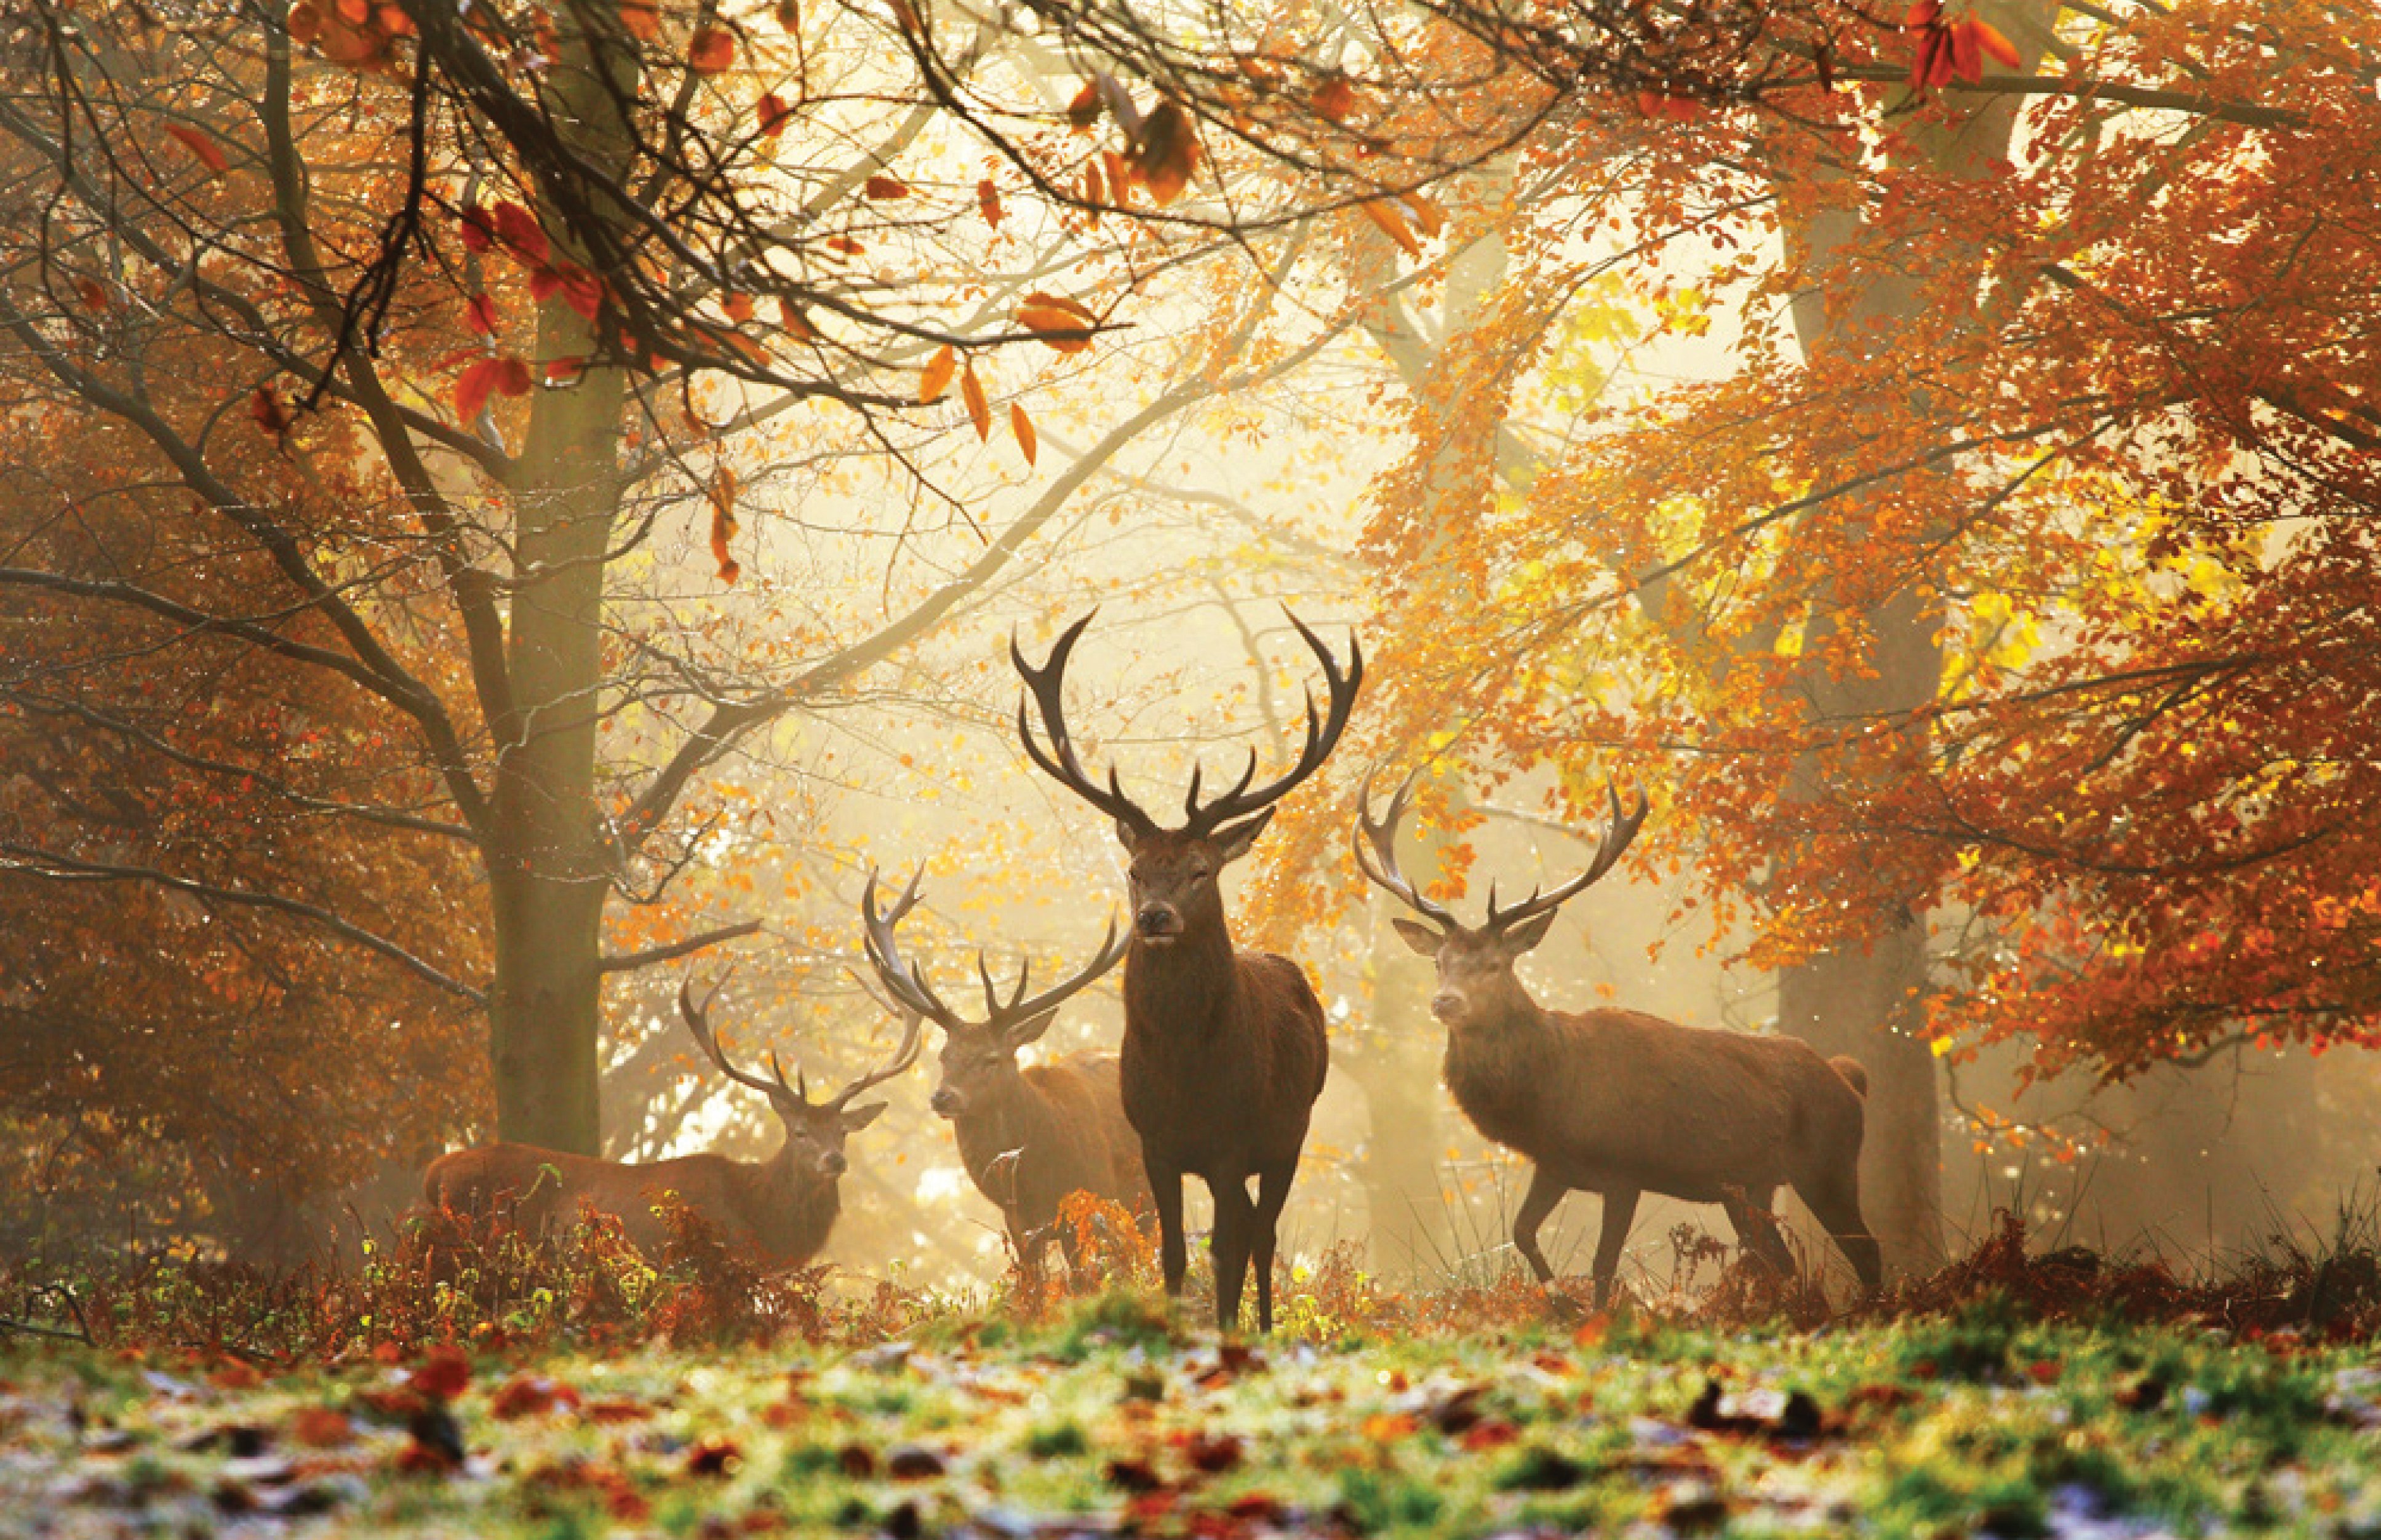 Male red deer with huge antlers standing amongst dried ferns with autumn trees out of focus, on cover of 'Richmond Park', by ACC Art Books.